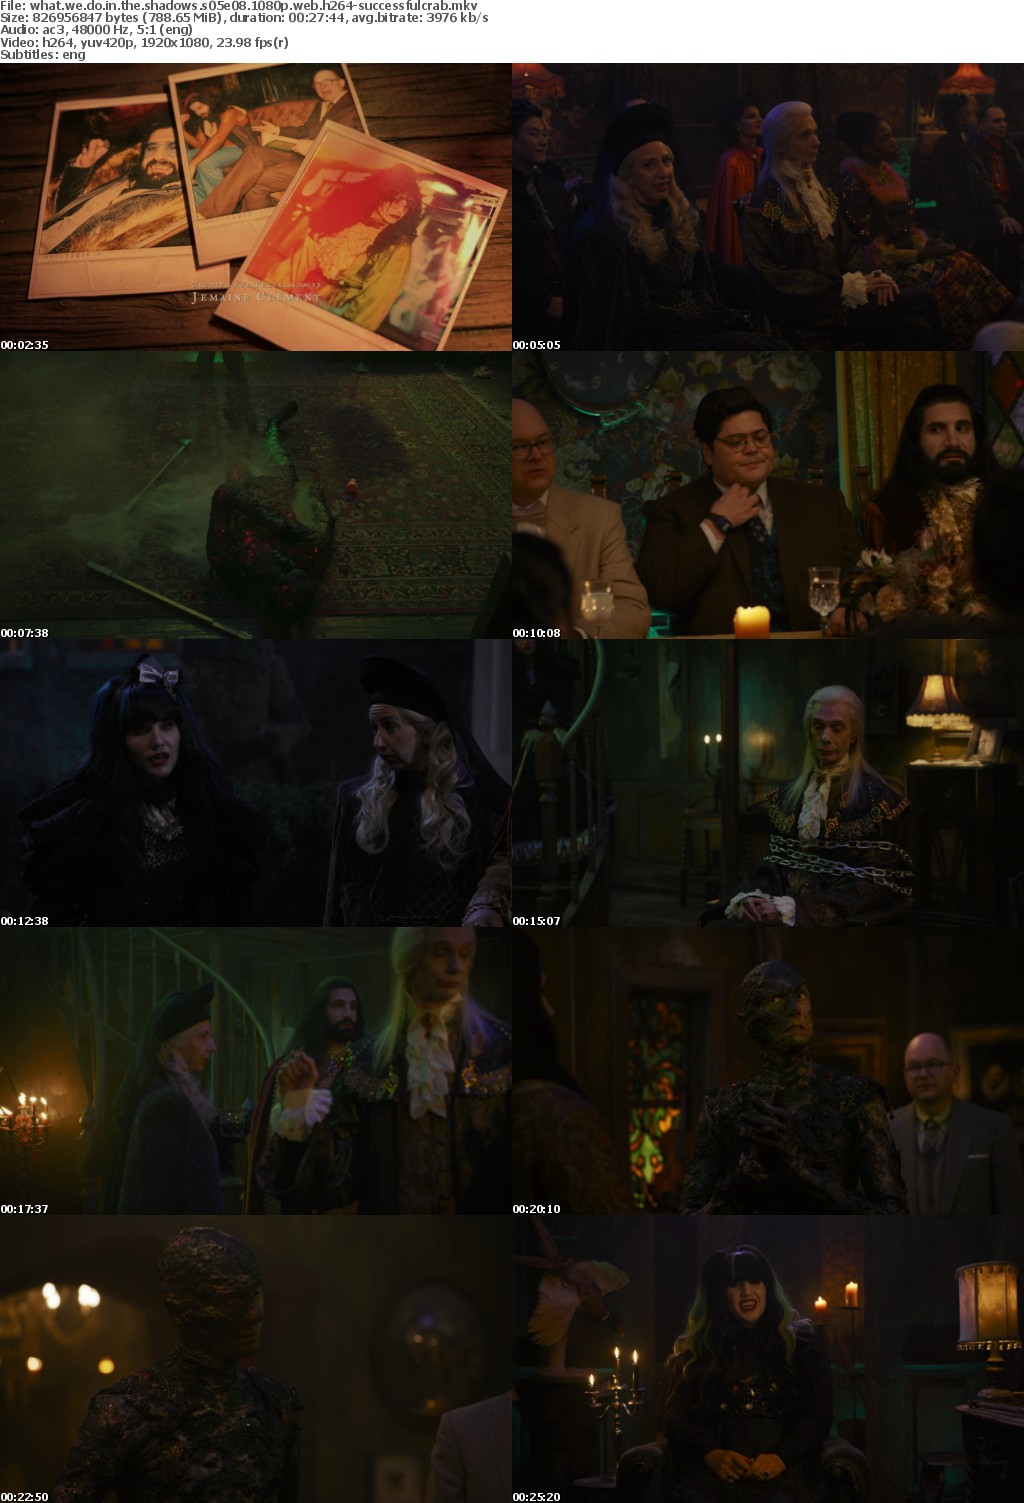 What We Do in the Shadows S05E08 1080p WEB H264-SuccessfulCrab